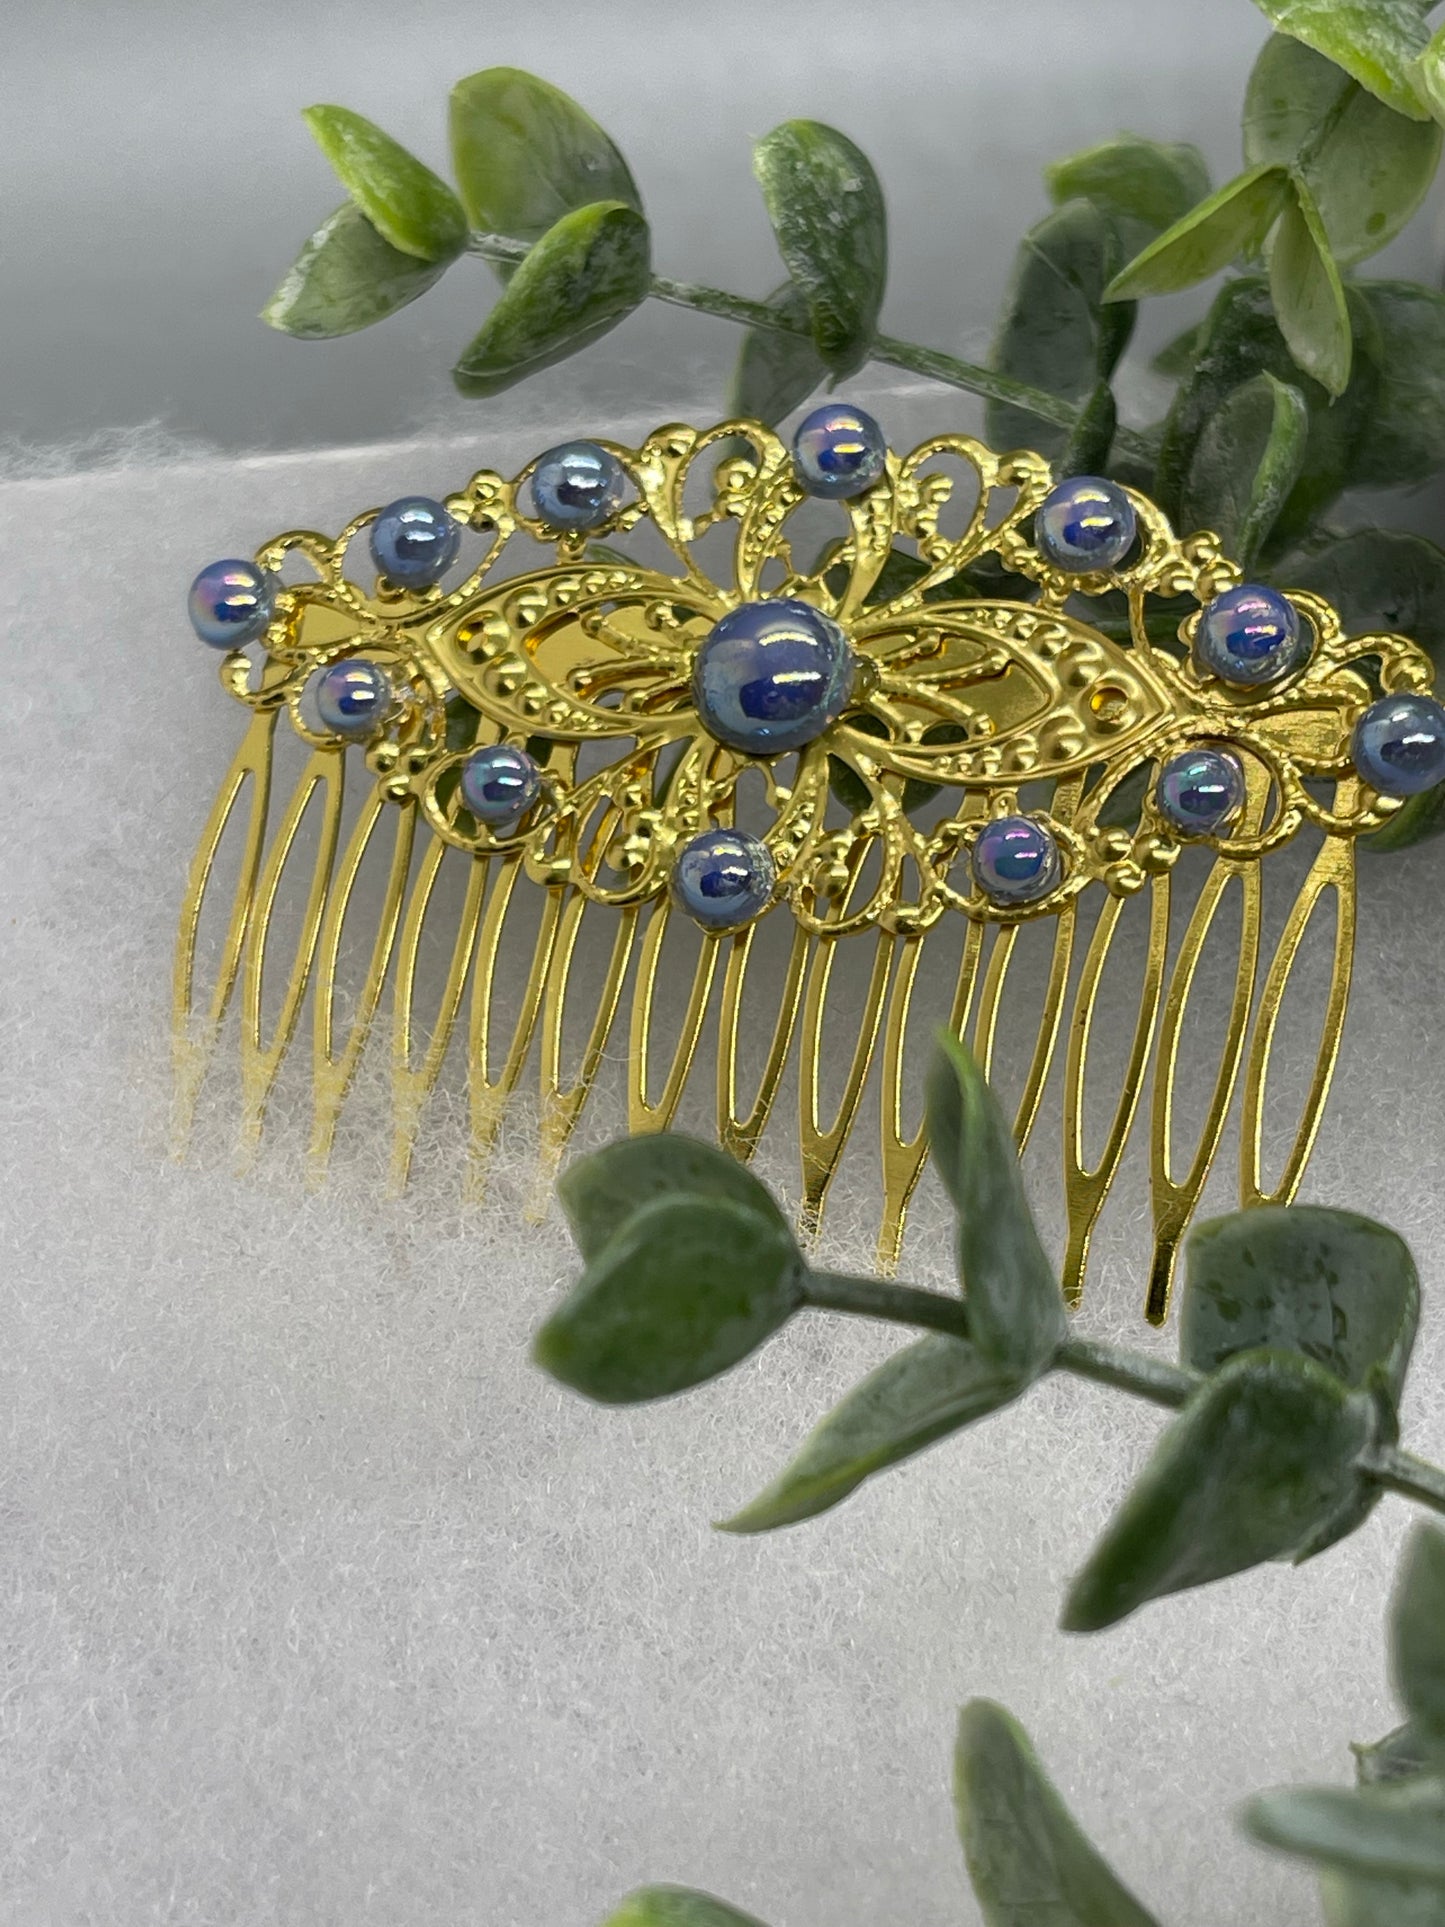 Blue iridescent Pearl vintage style Gold tone side comb hair accessory accessories gift birthday event formal bridesmaid wedding 3.5” Metal side Comb